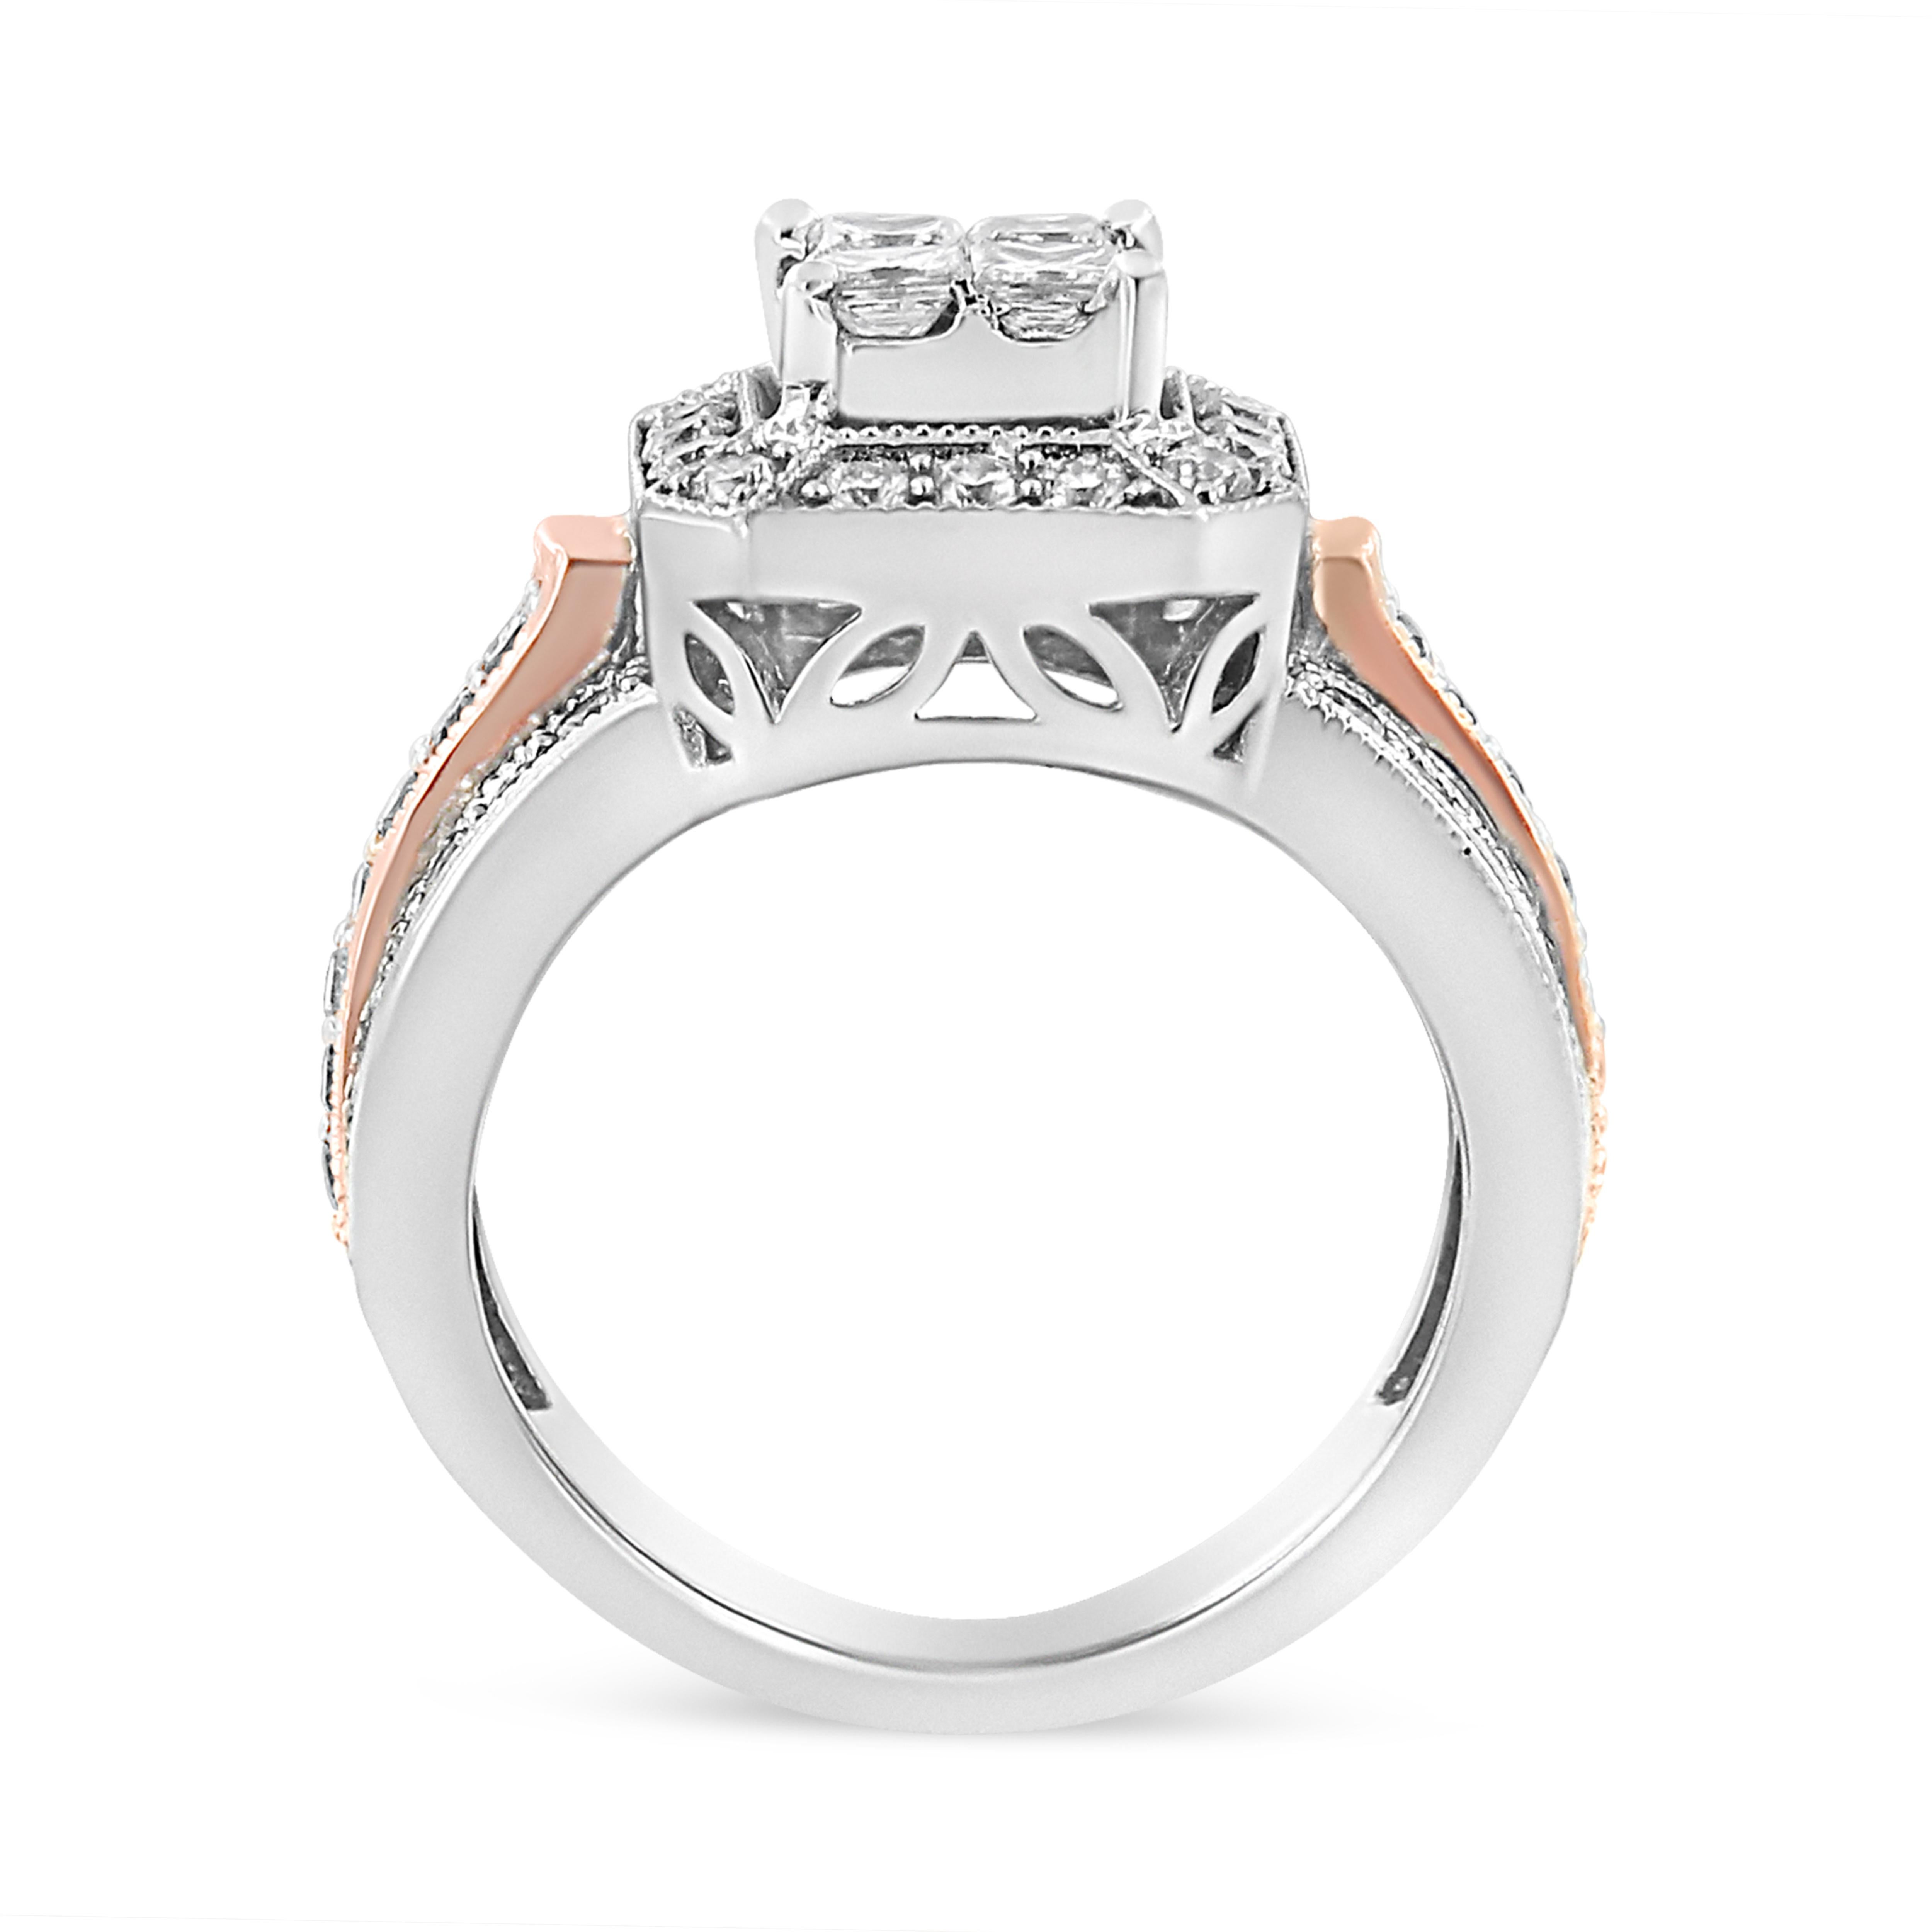 For Sale:  14K White and Rose Gold 1 1/8 Carat Diamond Triple Shank Halo Cocktail Ring 5